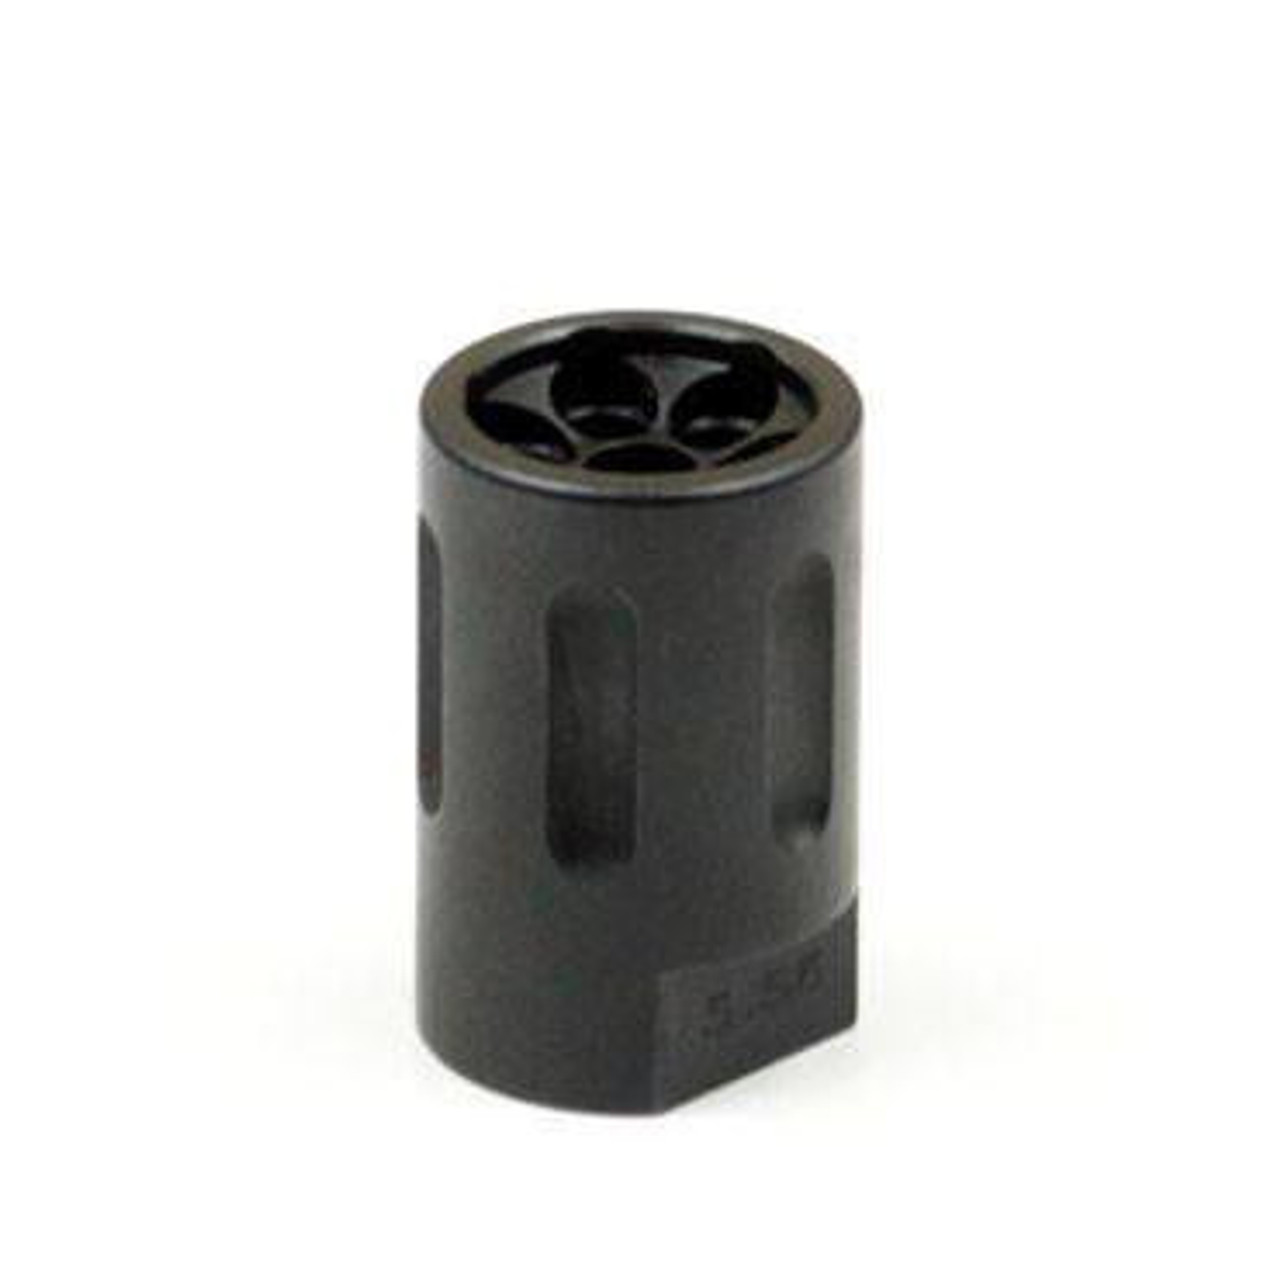 S&J Hardware Linear Compensator, .223, 9mm and 7.62